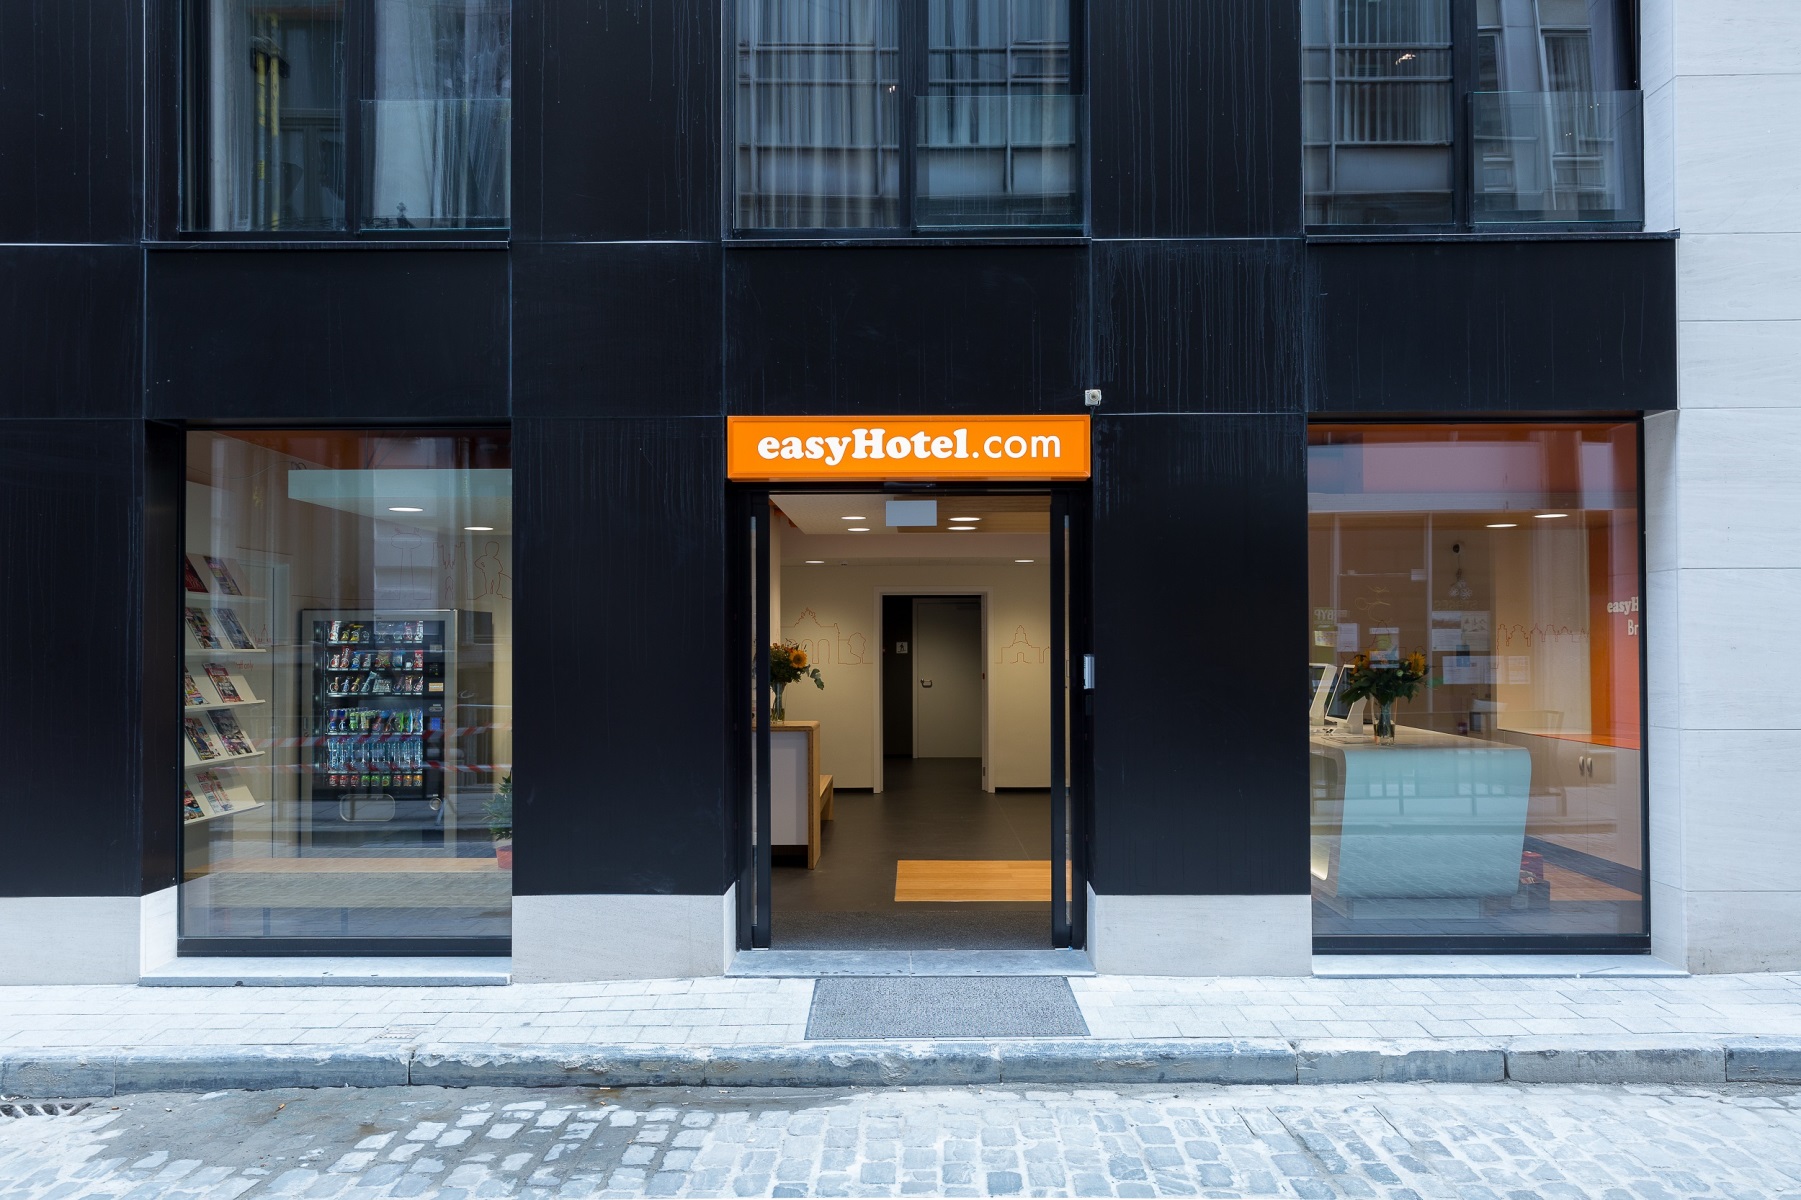 easyHotel Brussels City Center <br/>49.00 ew <br/> <a href='http://vakantieoplossing.nl/outpage/?id=196ee13c0ca8afdd664dc74d6accc652' target='_blank'>View Details</a>